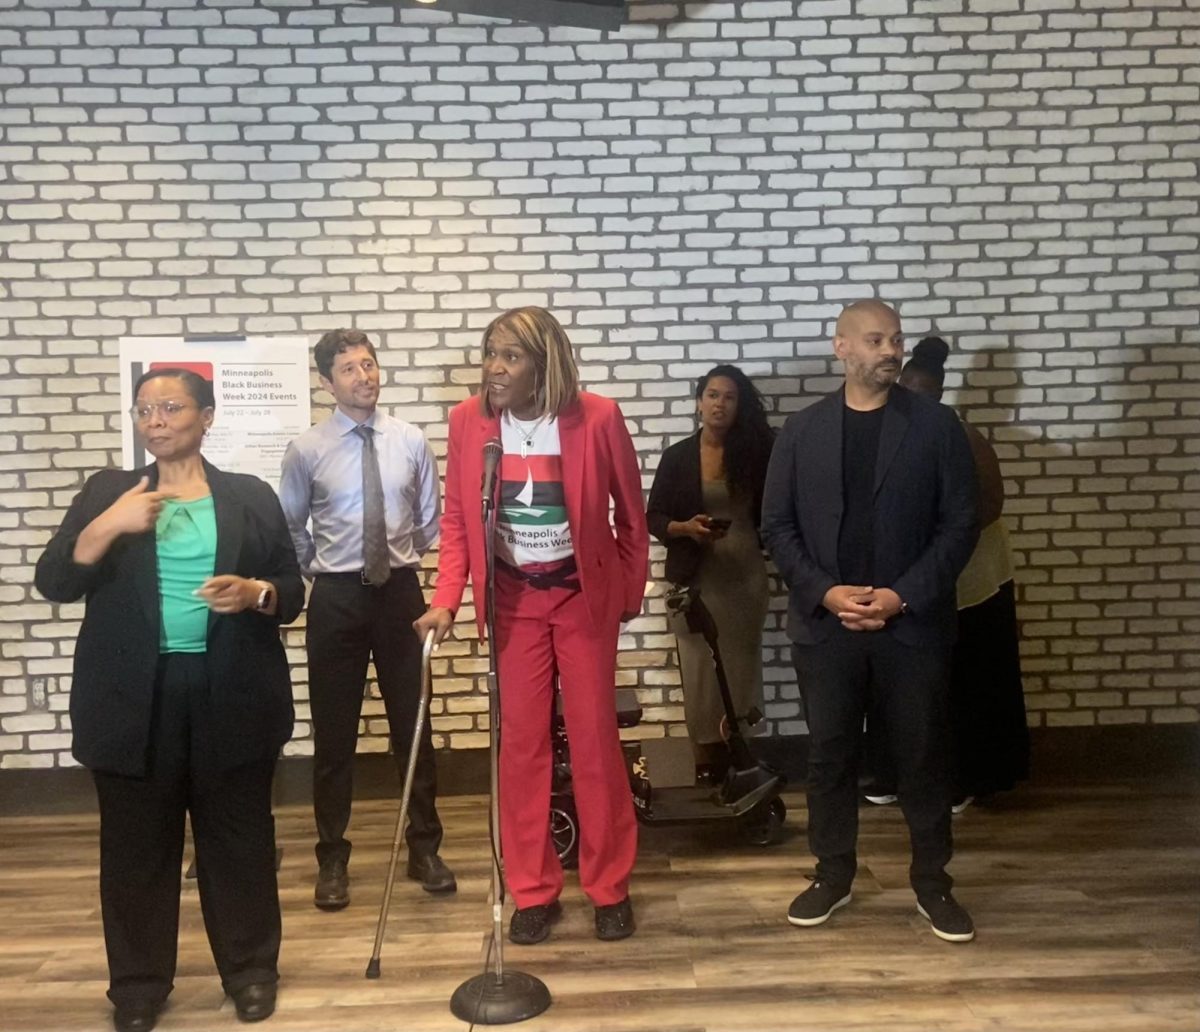 West Broadway Business and Area Coalition Crystal Porter and Lutungi from Lutungi’s Palate speaking at the Black Business Kickoff Event on Monday.